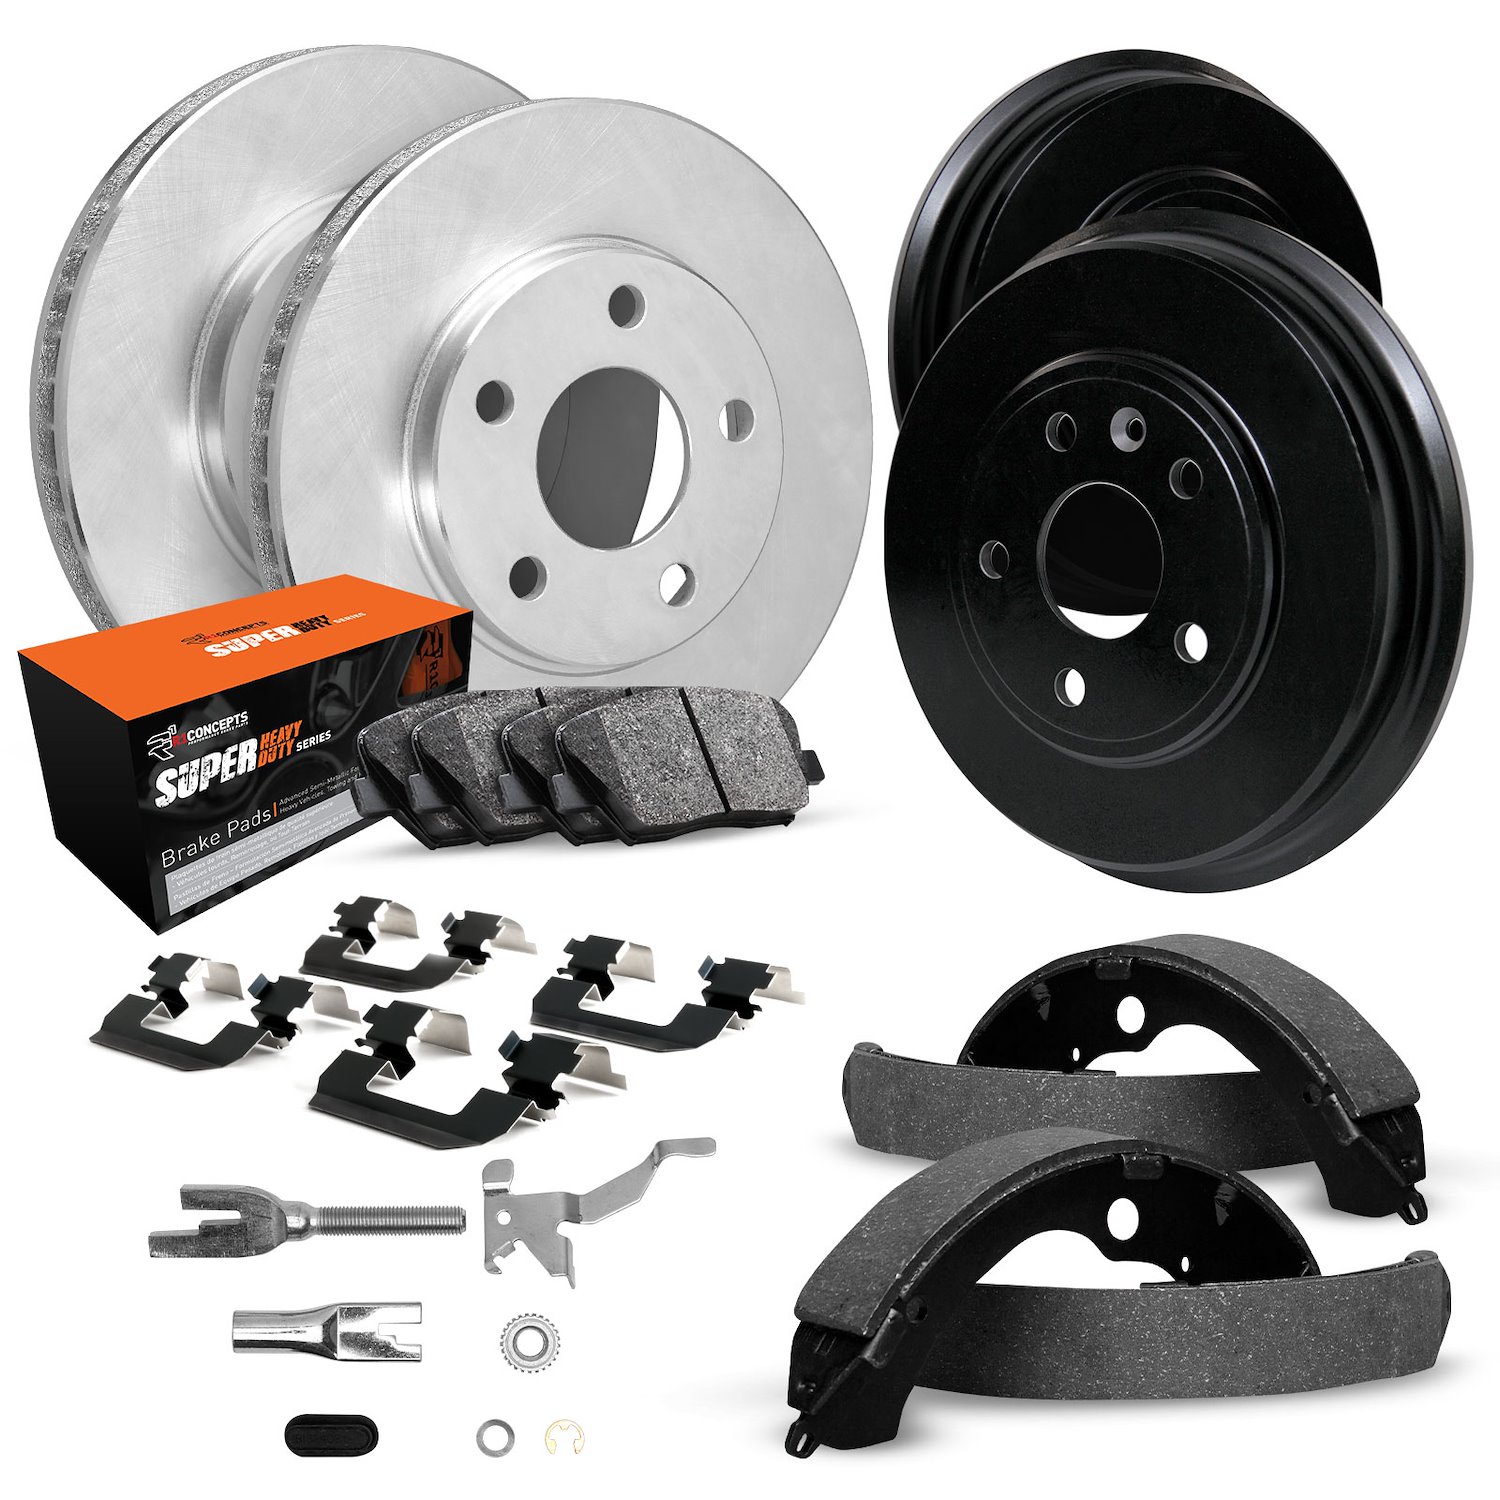 E-Line Blank Brake Rotor & Drum Set w/Super-Duty Pads, Shoes, Hardware, & Adjusters, 1974-1975 Ford/Lincoln/Mercury/Mazda